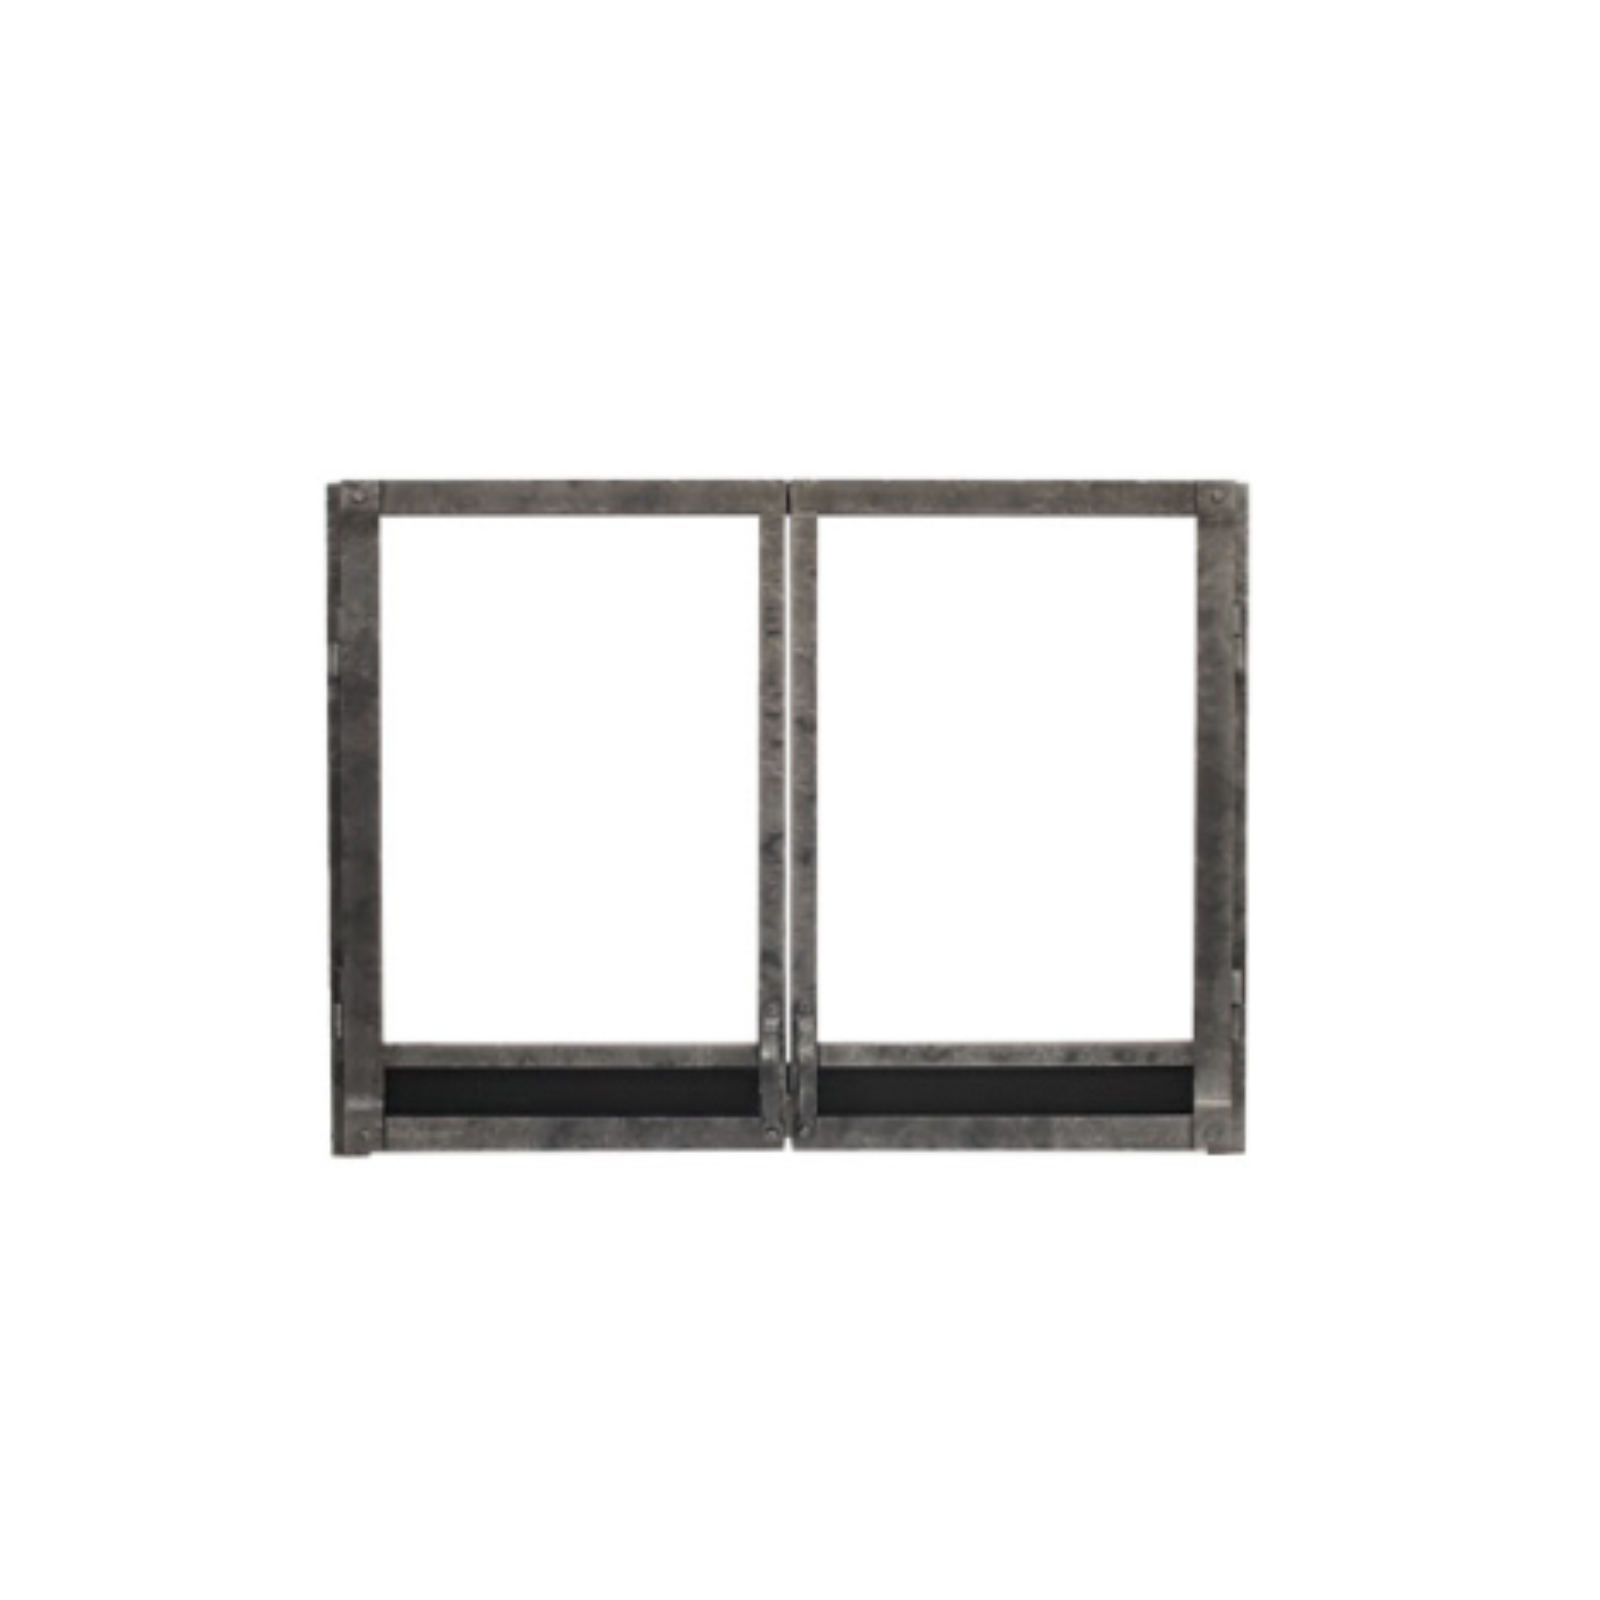 Empire Distress Pewter Forged Iron Door and Frame - DDF36CPD